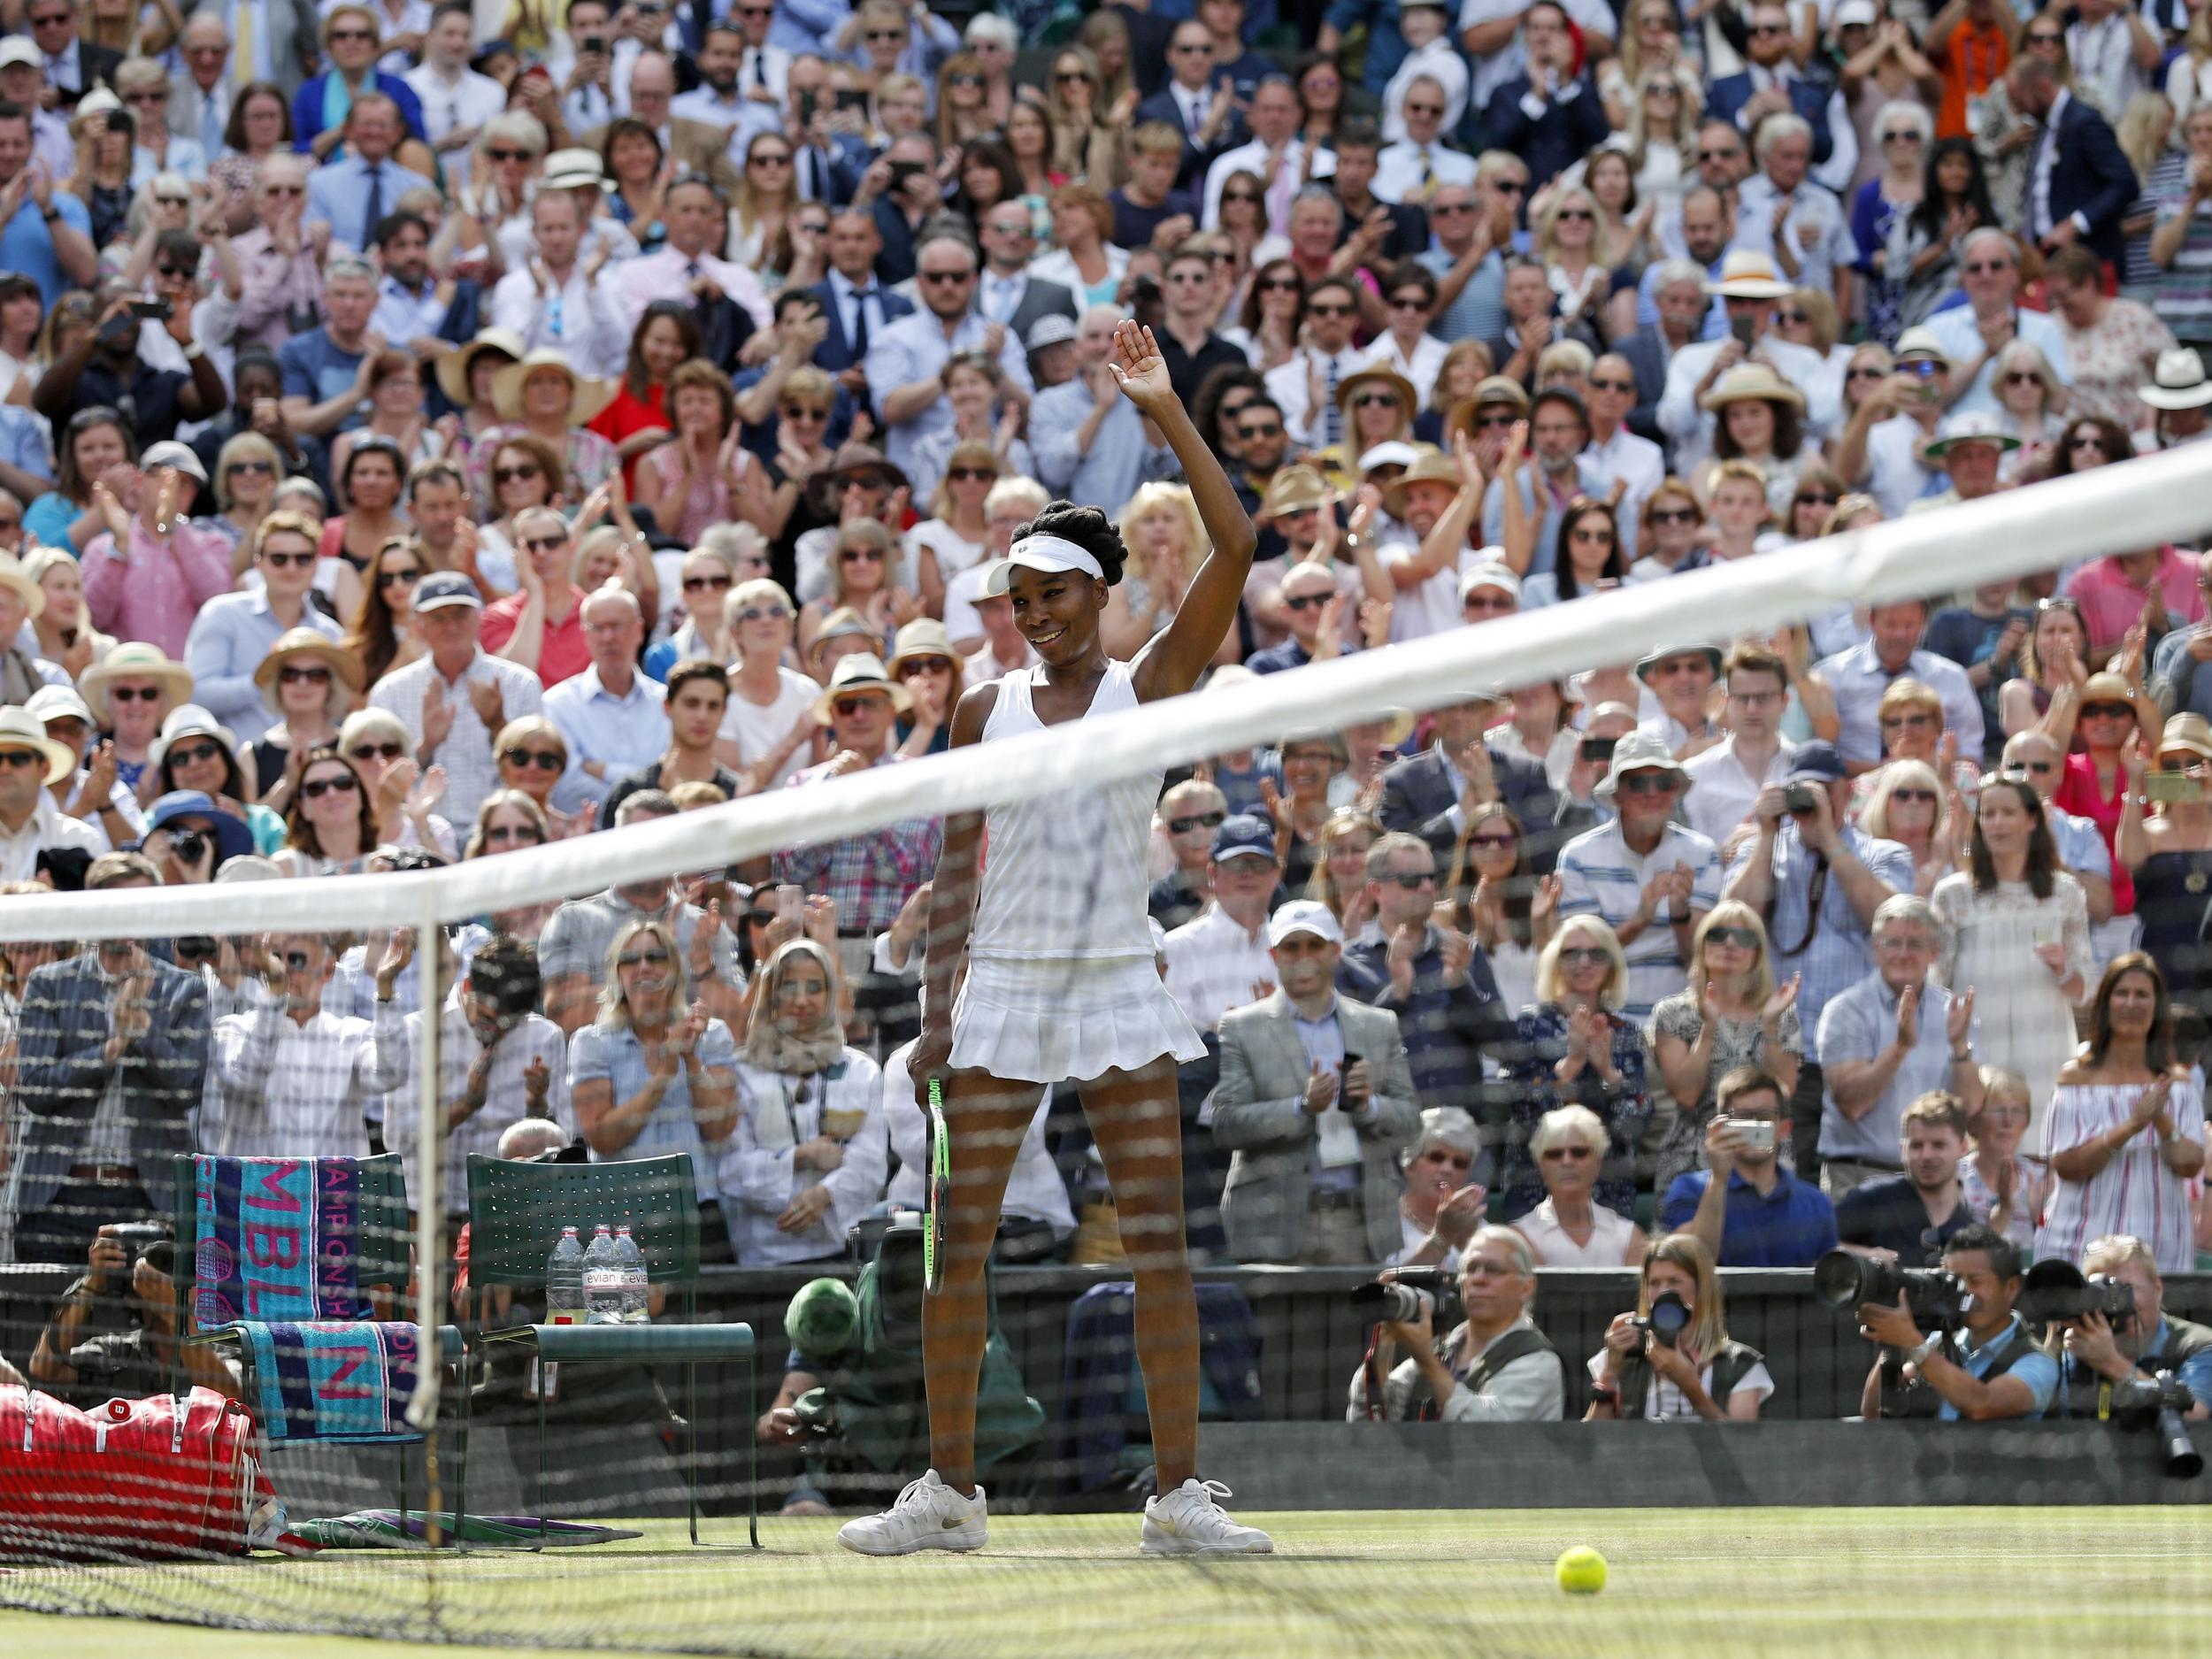 Venus Williams will battle for her sixth Wimbledon title on Saturday